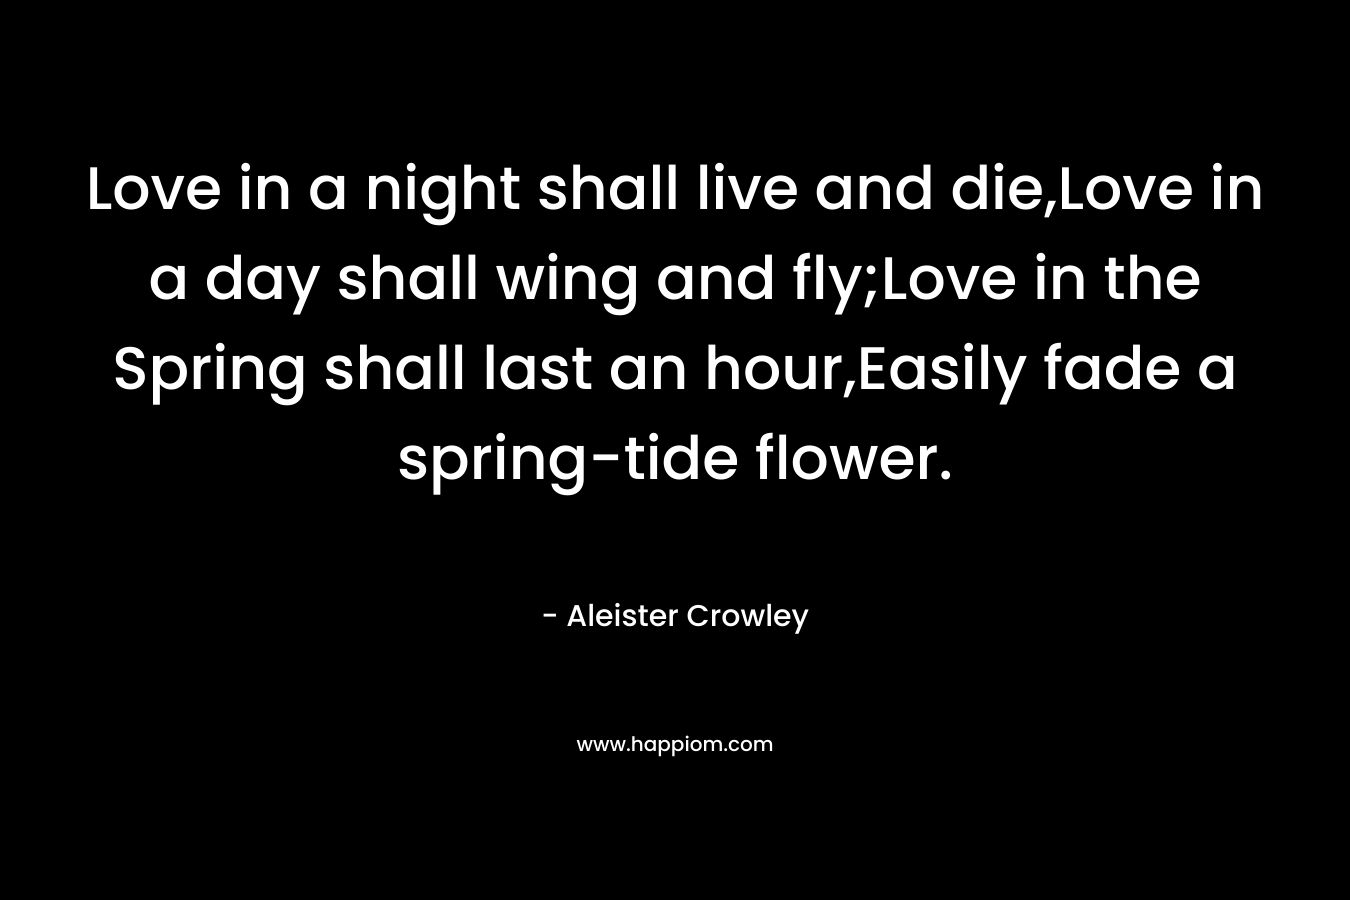 Love in a night shall live and die,Love in a day shall wing and fly;Love in the Spring shall last an hour,Easily fade a spring-tide flower. – Aleister Crowley